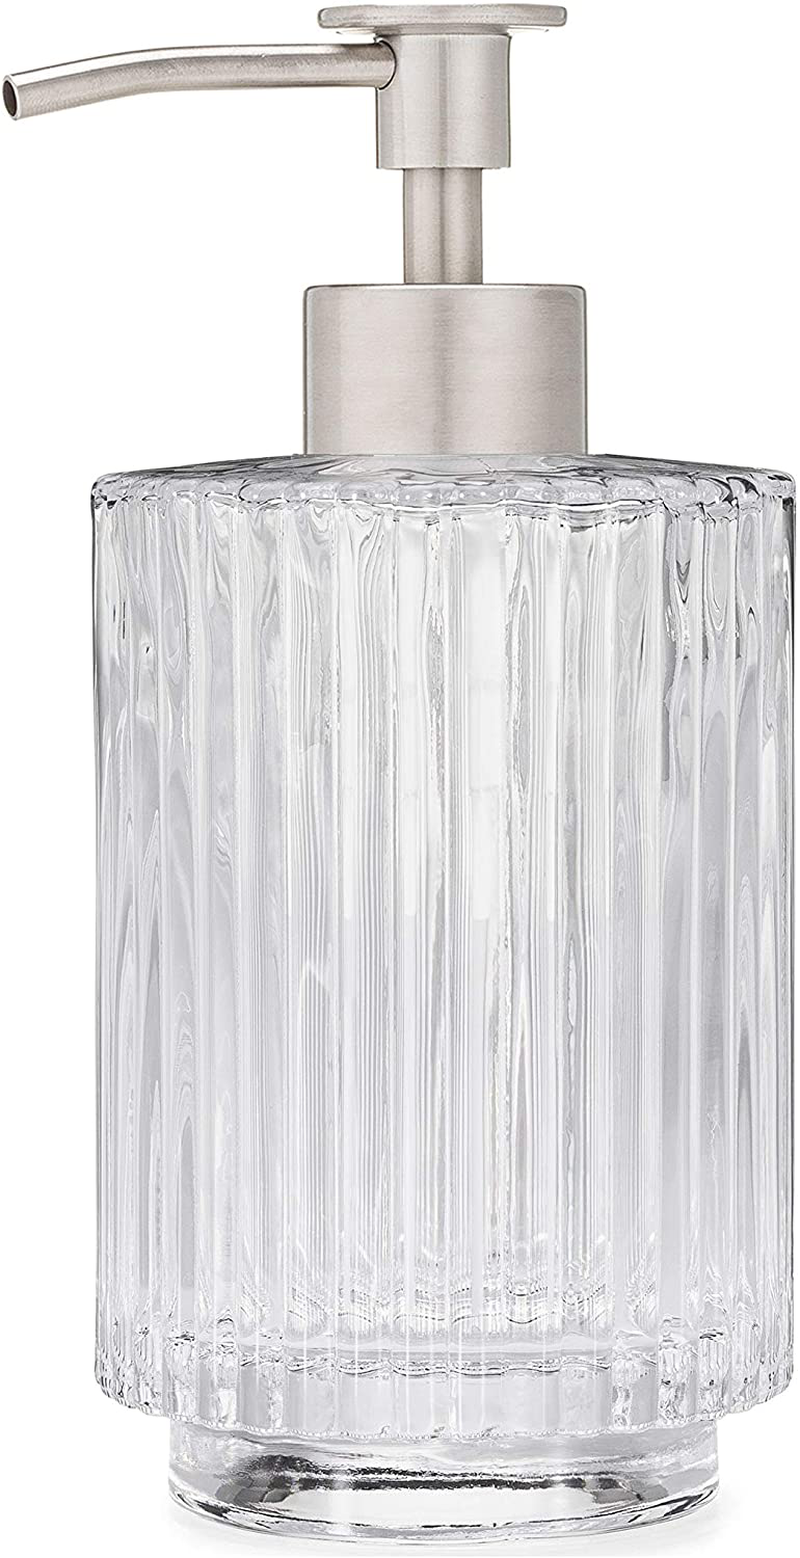 Soap Dispensers Parisian Fluted Clear Glass Vintage Style Soap